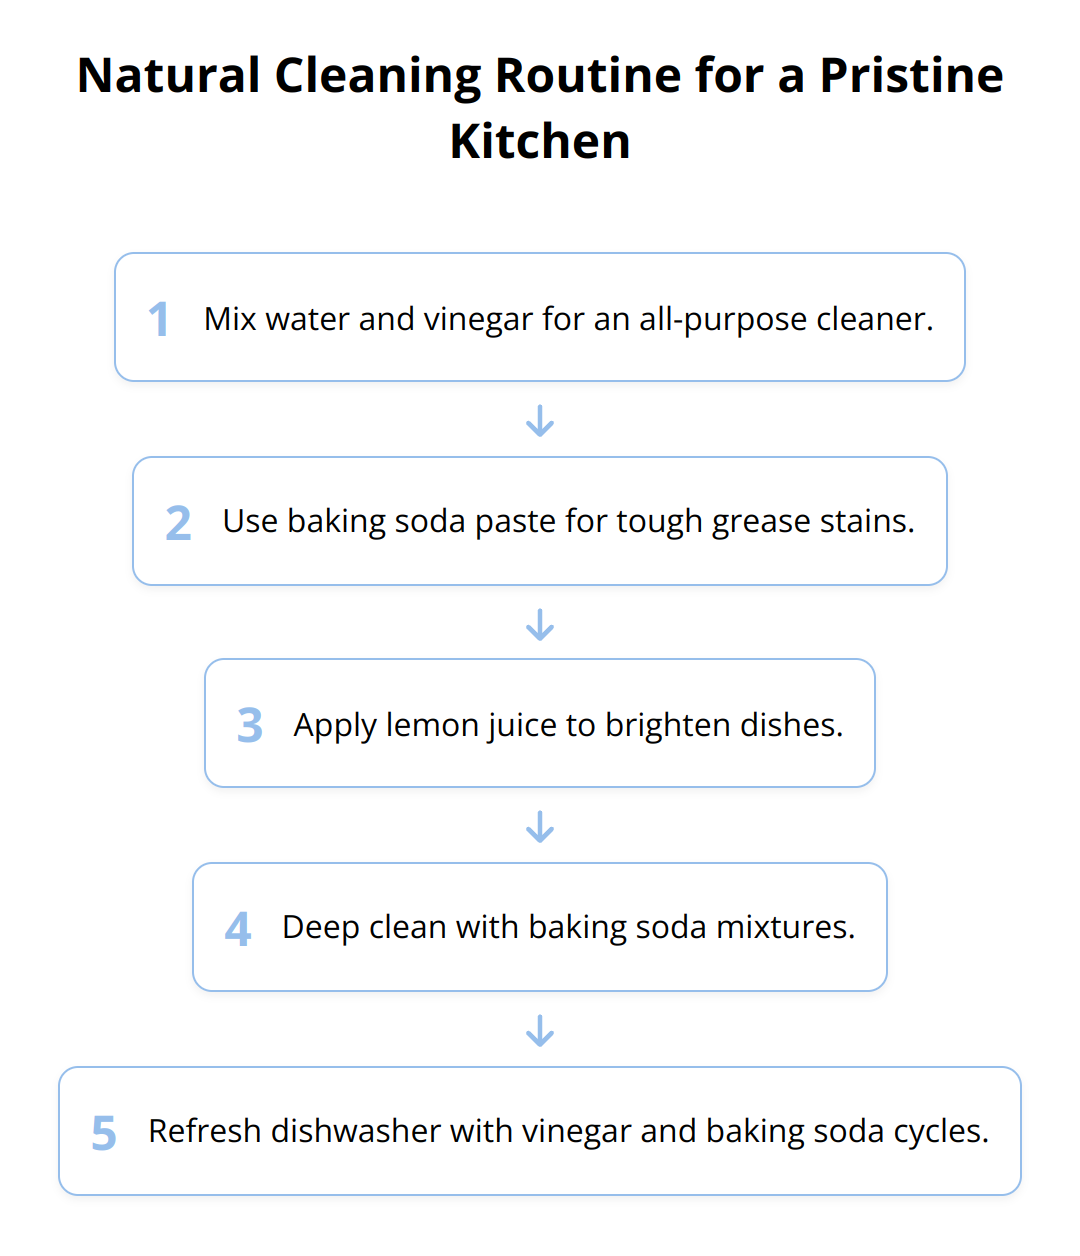 Flow Chart - Natural Cleaning Routine for a Pristine Kitchen